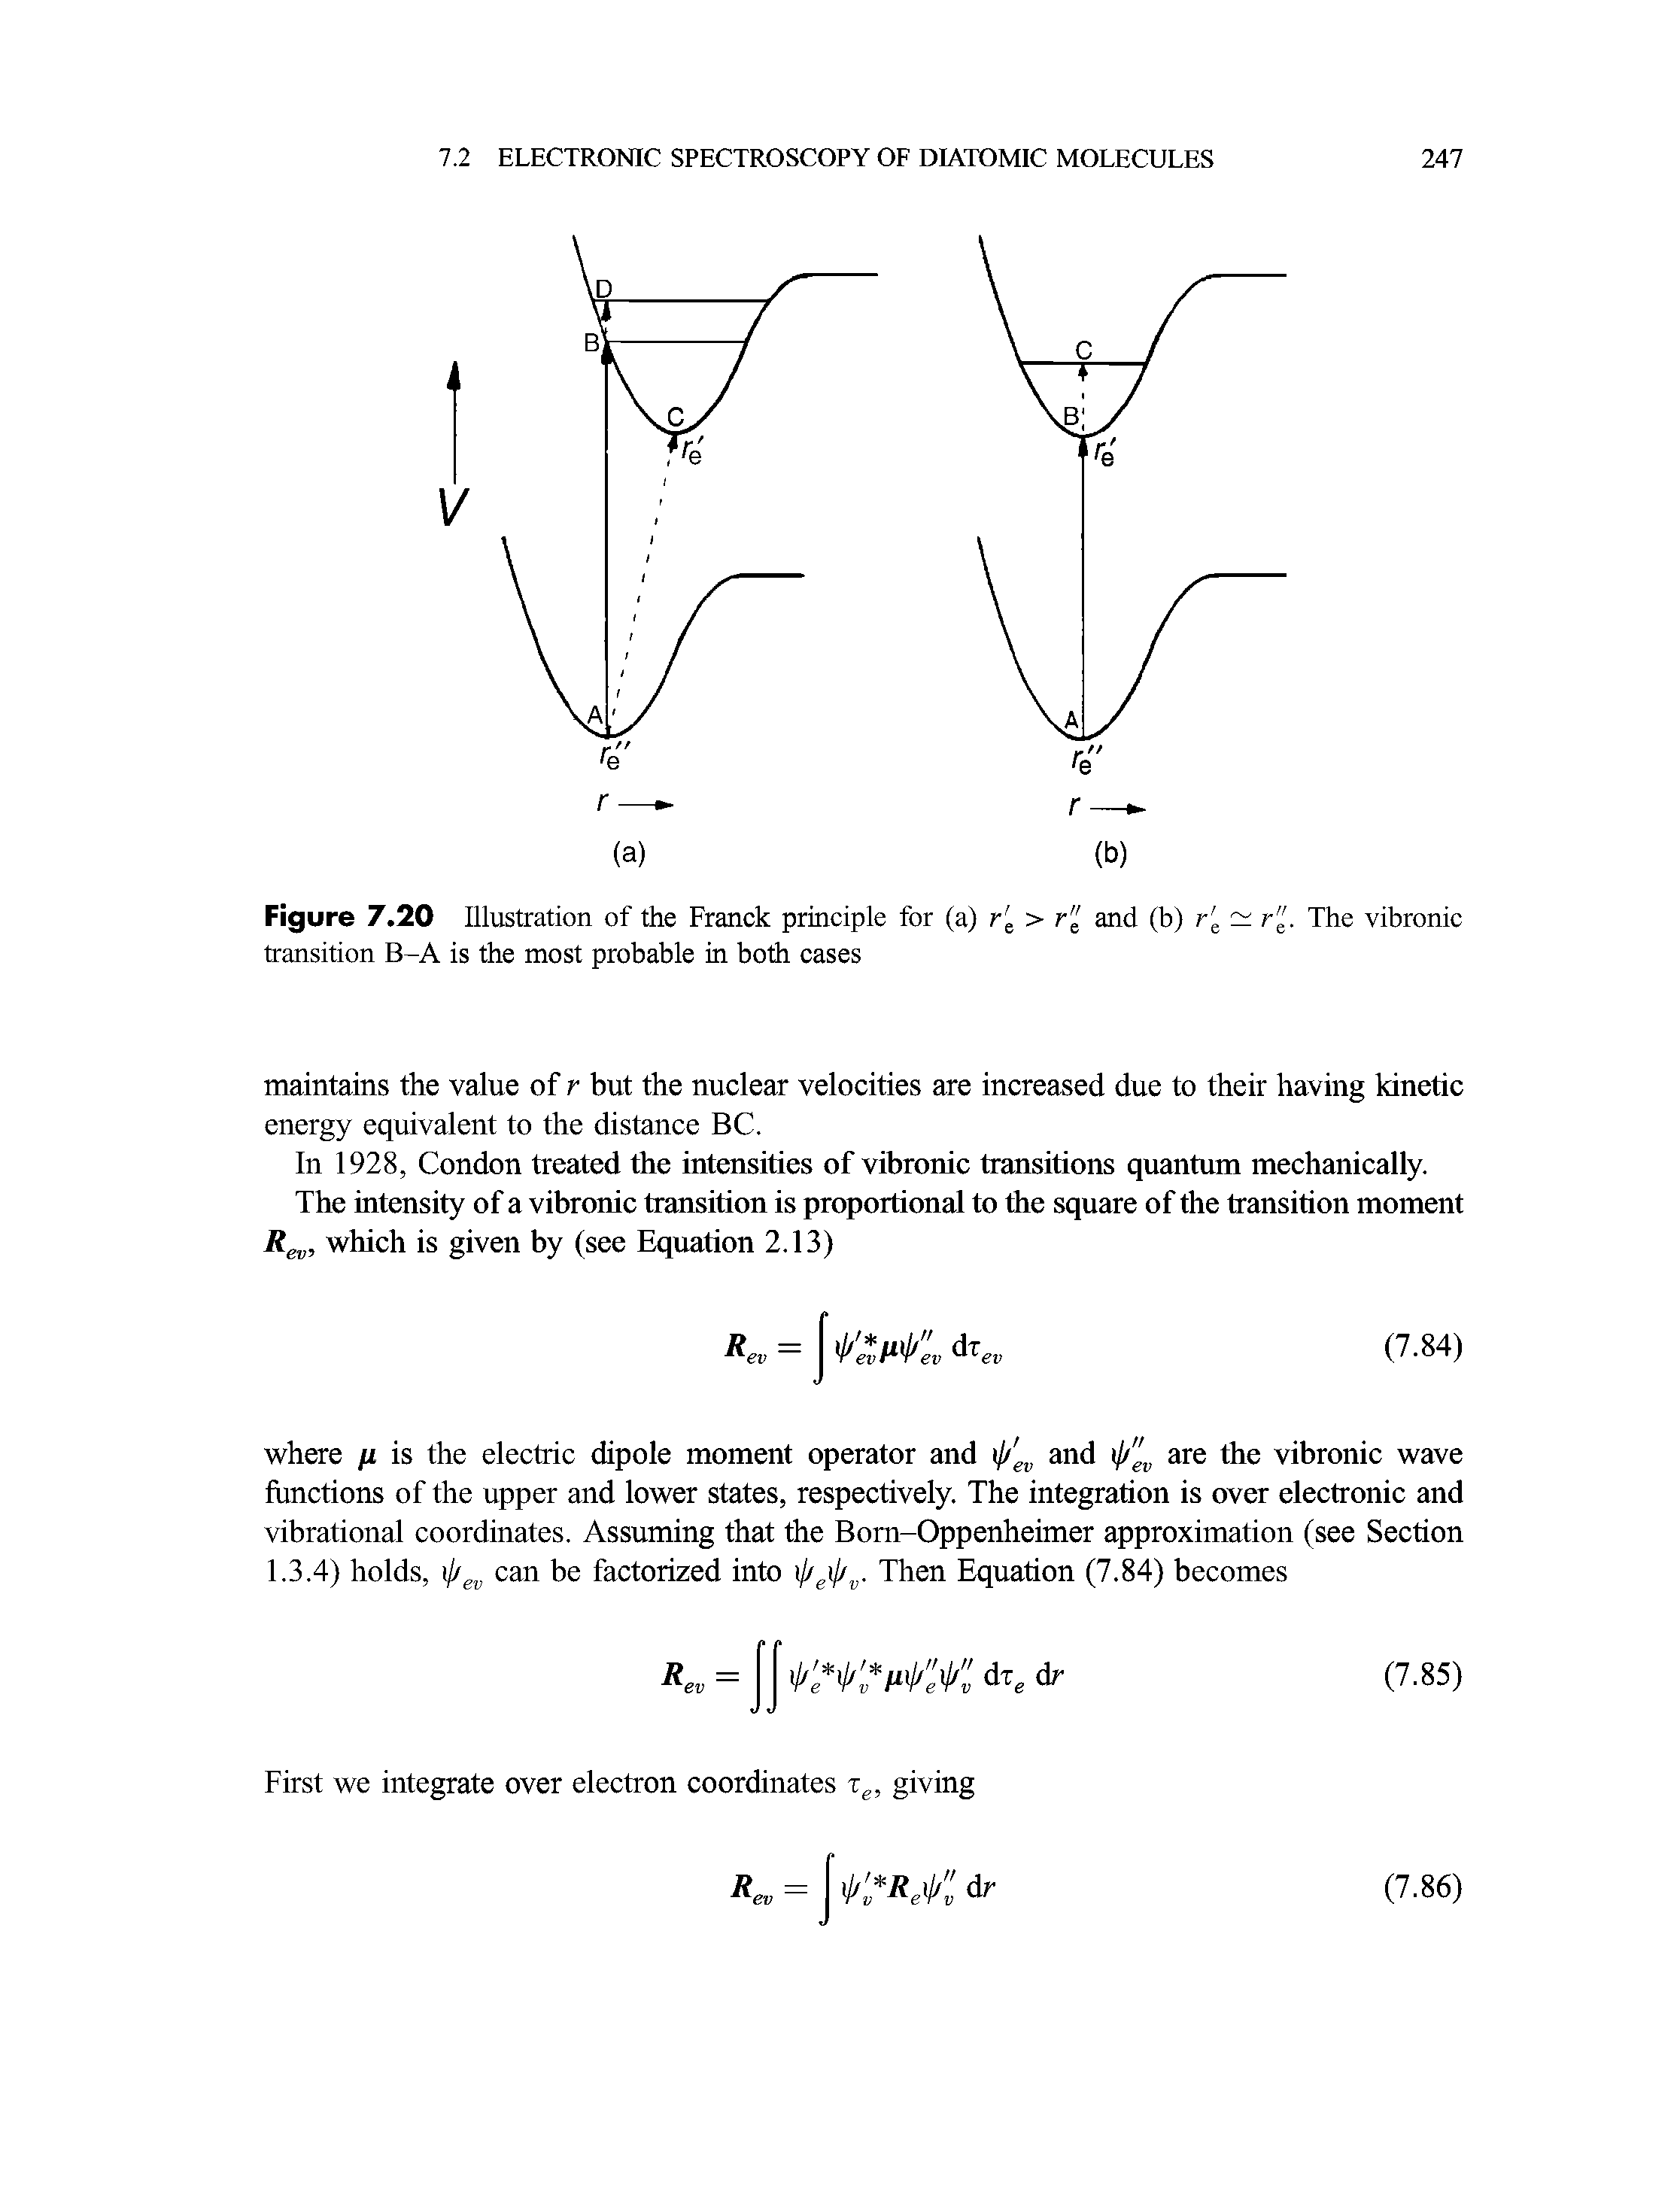 Figure 7.20 Illustration of the Franck principle for (a) r e > r" and (b) r e r". The vibronic transition B-A is the most probable in both cases...